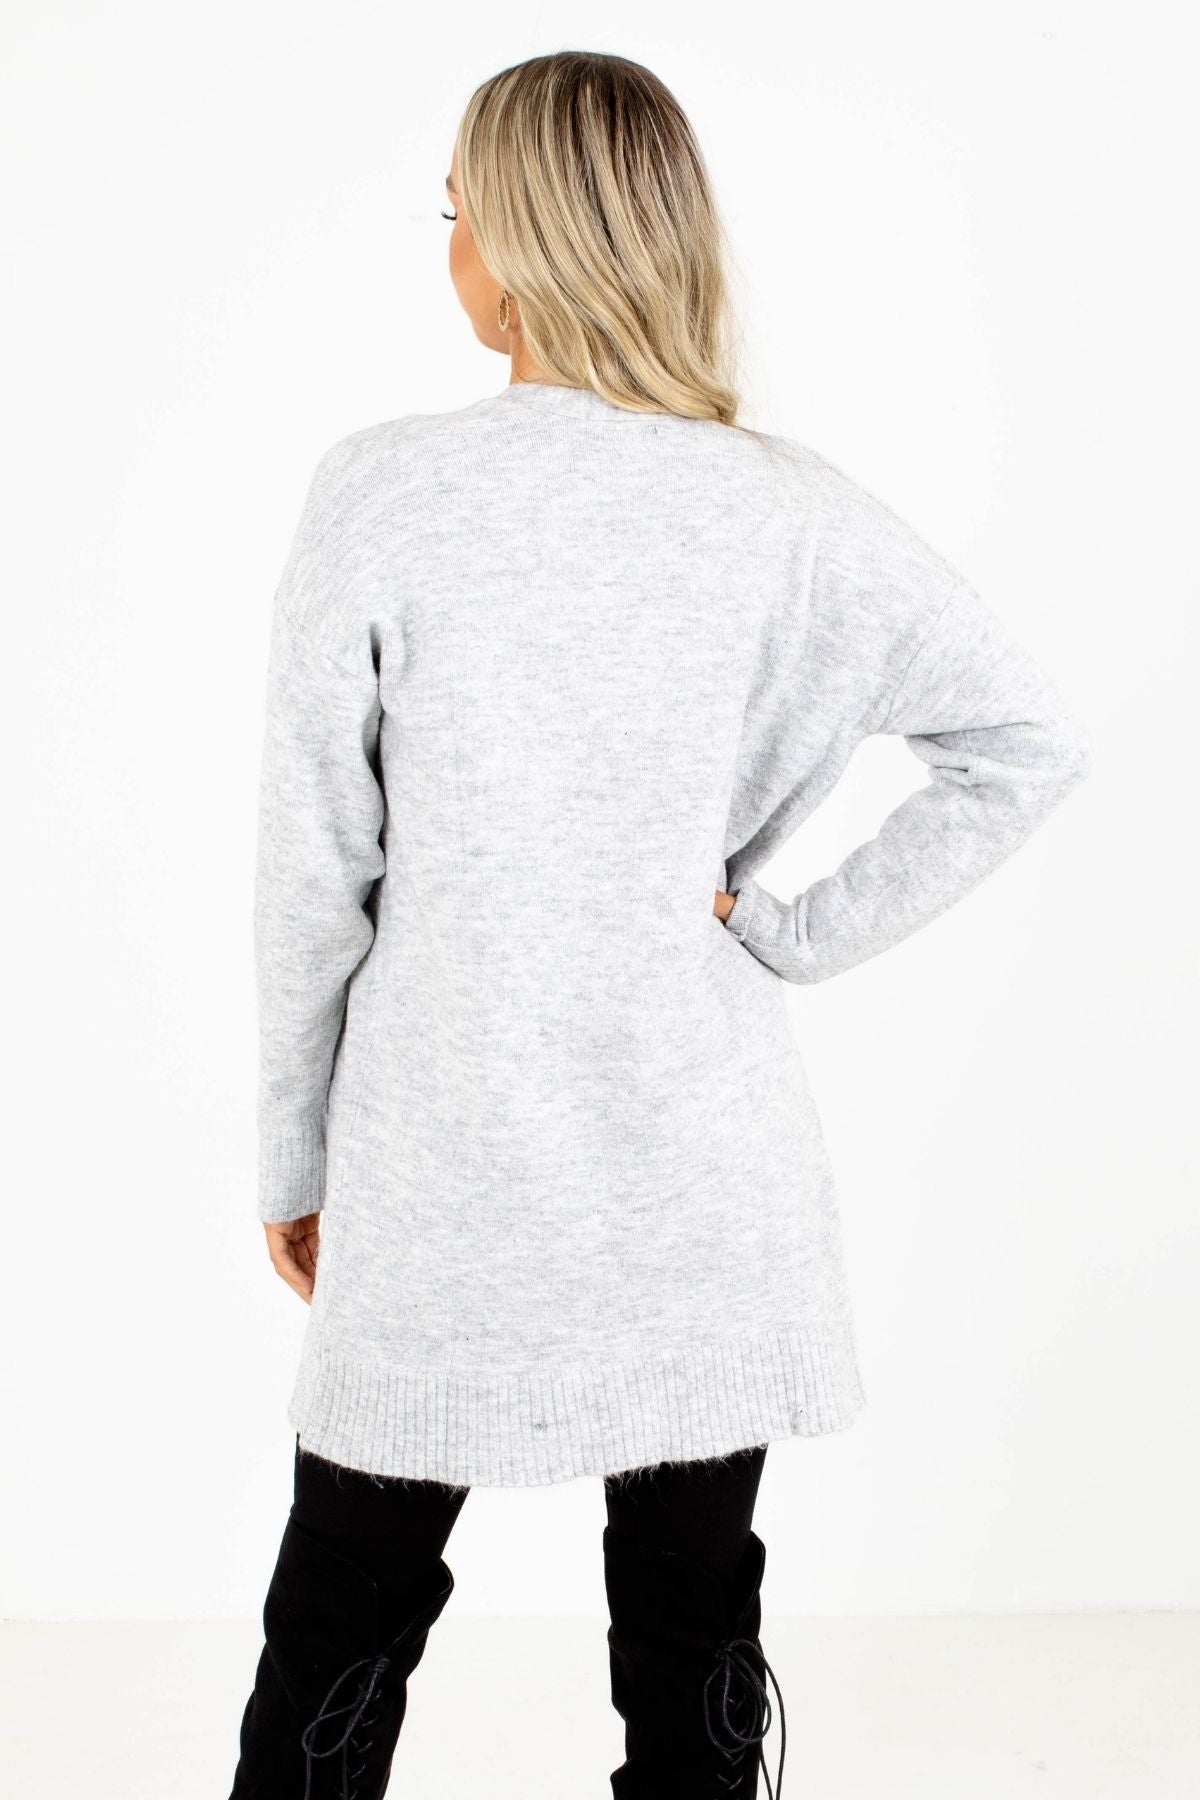 Women's Gray Cozy and Warm Boutique Cardigan